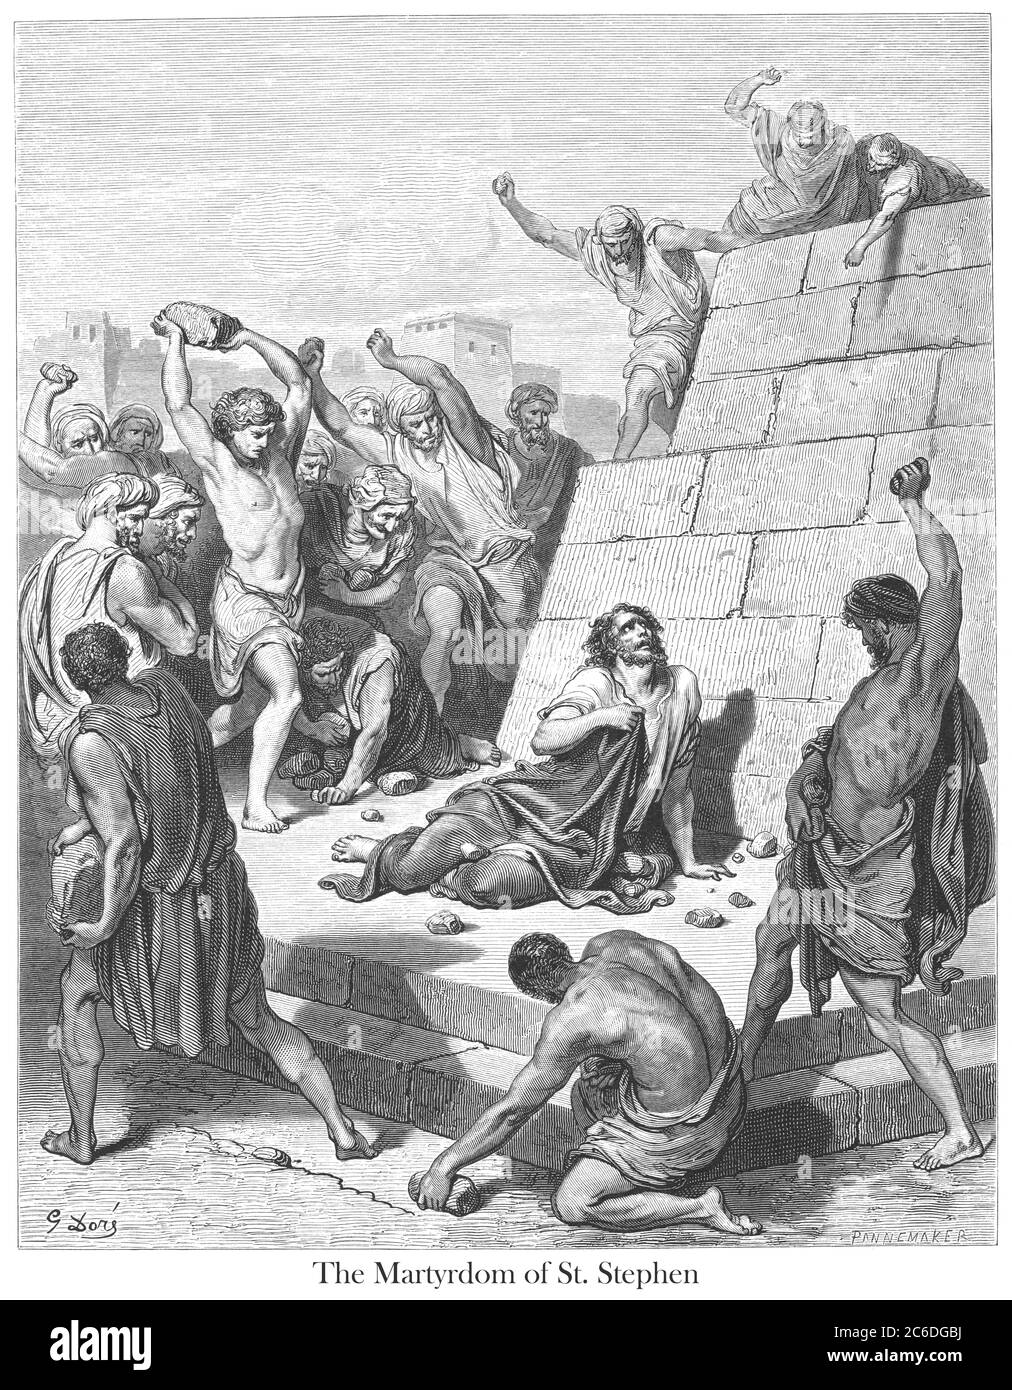 Martyrdom of St. Stephen [Acts 7:59-60] From the book 'Bible Gallery' Illustrated by Gustave Dore with Memoir of Dore and Descriptive Letter-press by Talbot W. Chambers D.D. Published by Cassell & Company Limited in London and simultaneously by Mame in Tours, France in 1866 Stock Photo